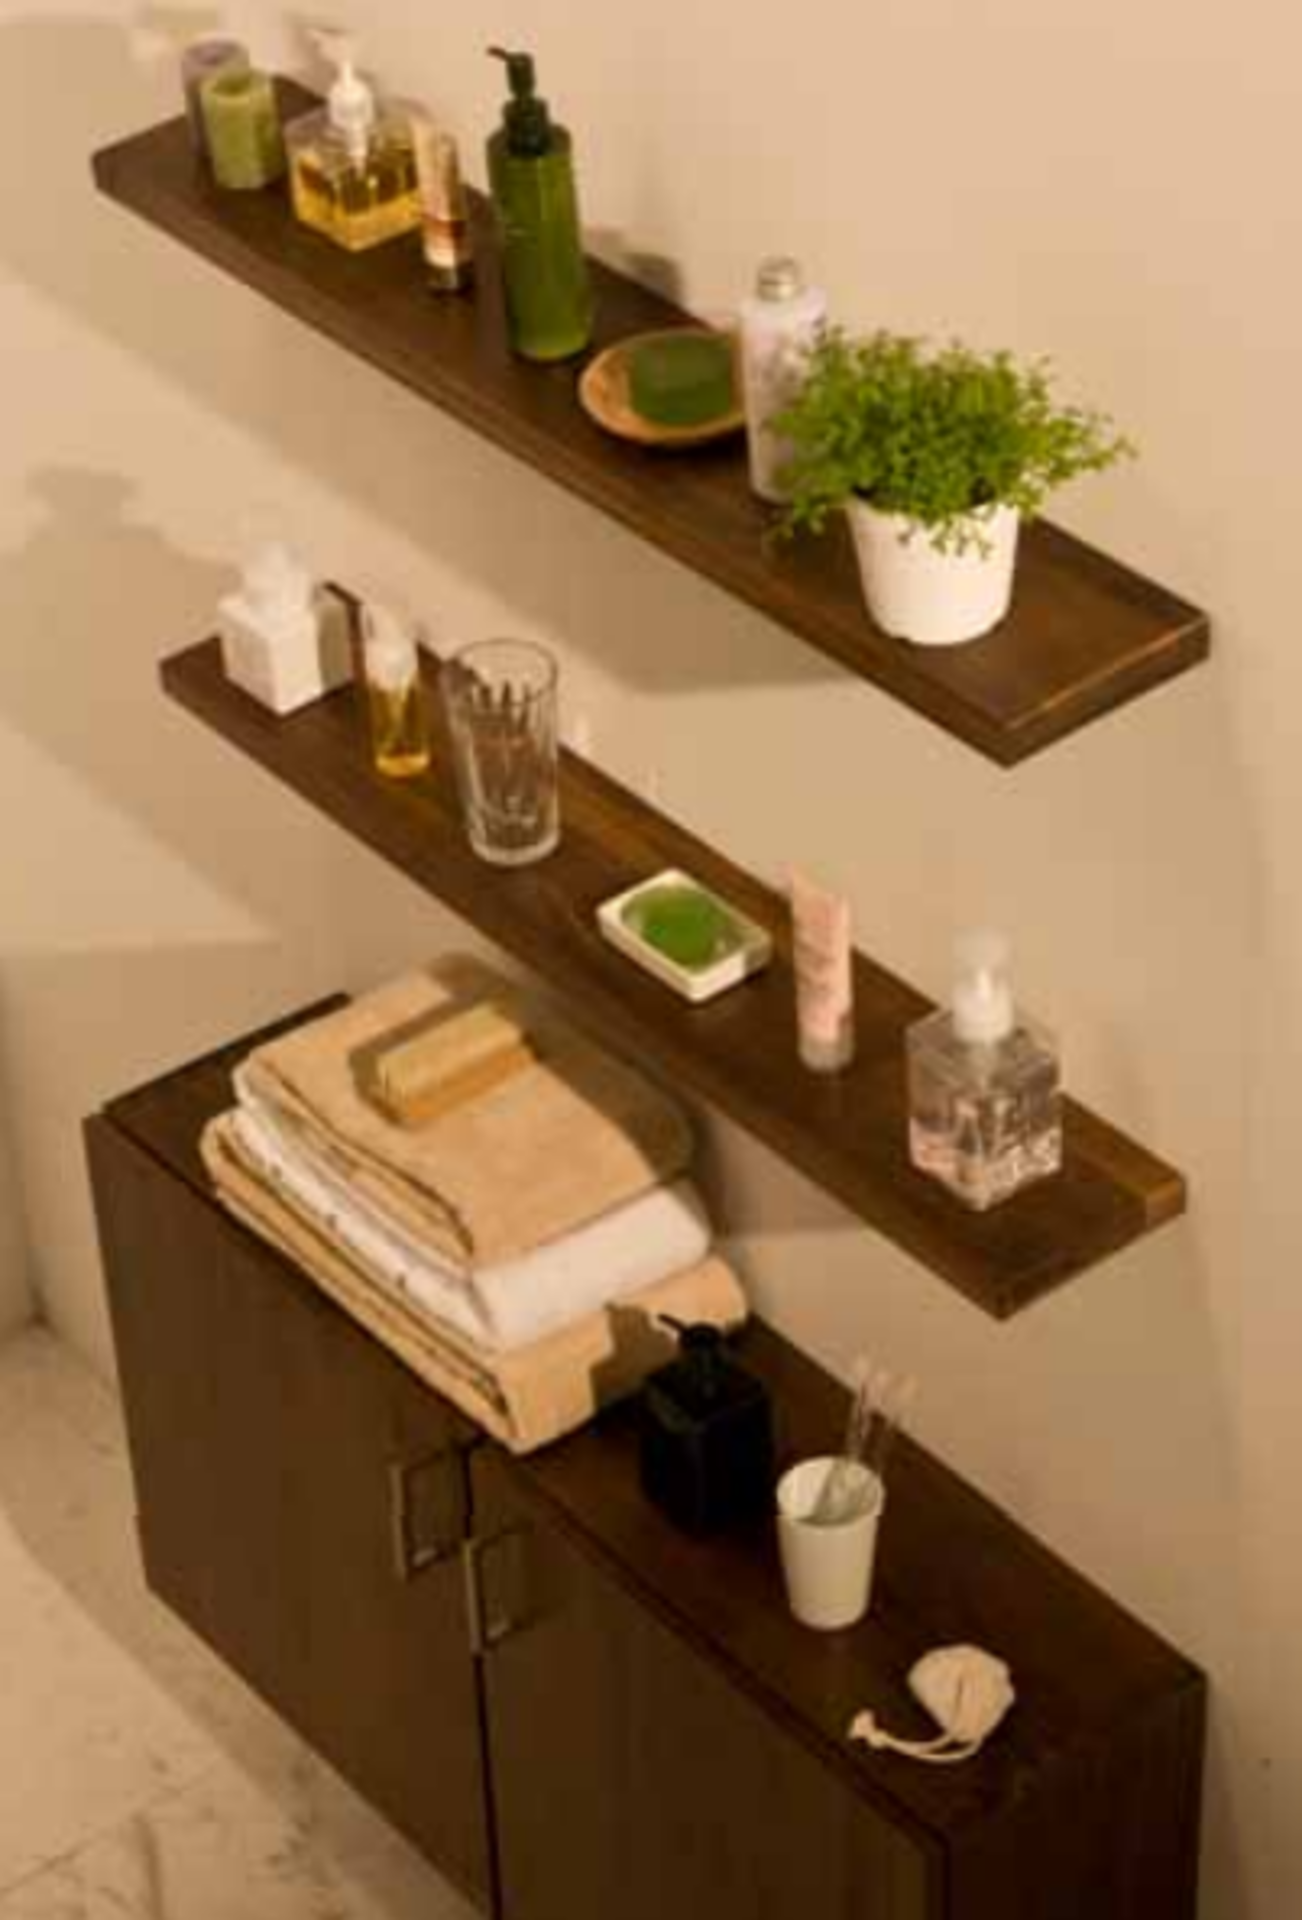 1 x Stonearth Extra Large Bathroom Storage Shelf With Concealed Brackets - American Solid WALNUT